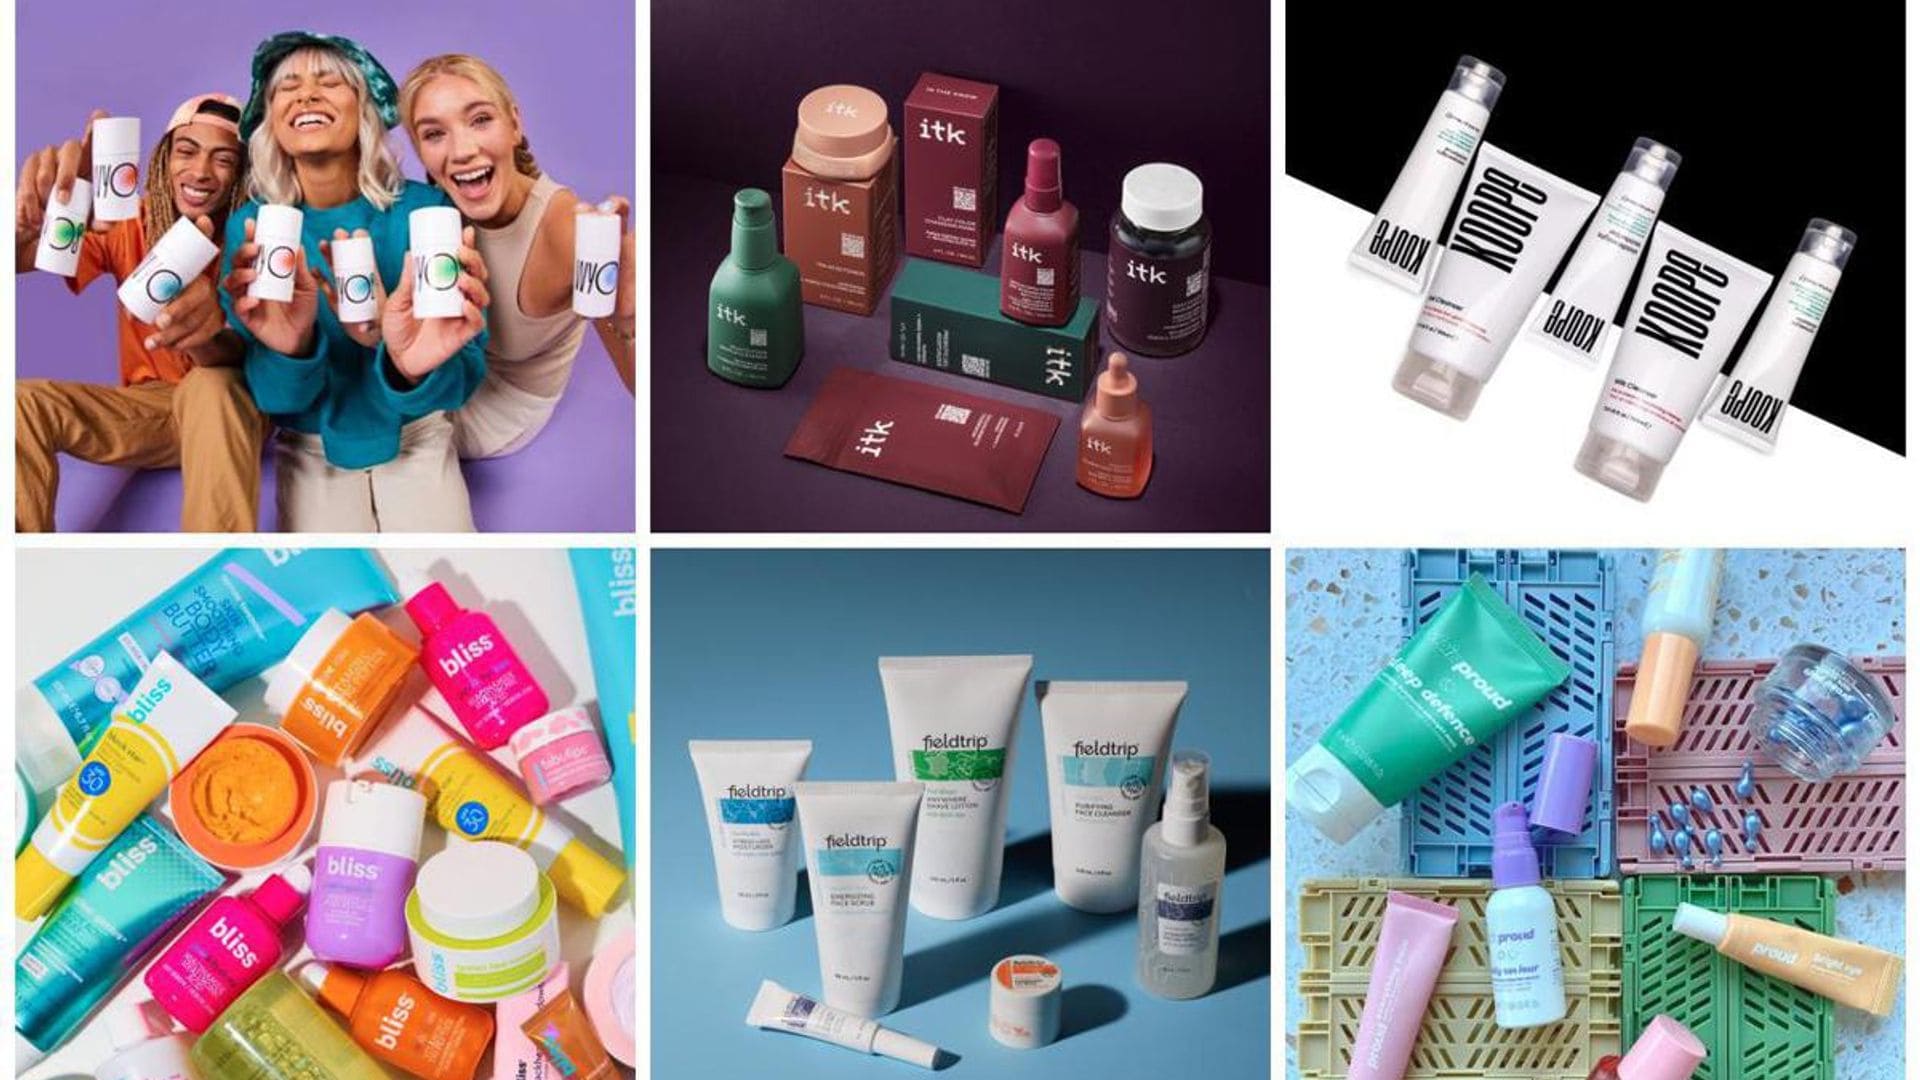 Cosmetics and personal care brands every Gen Z would love to try